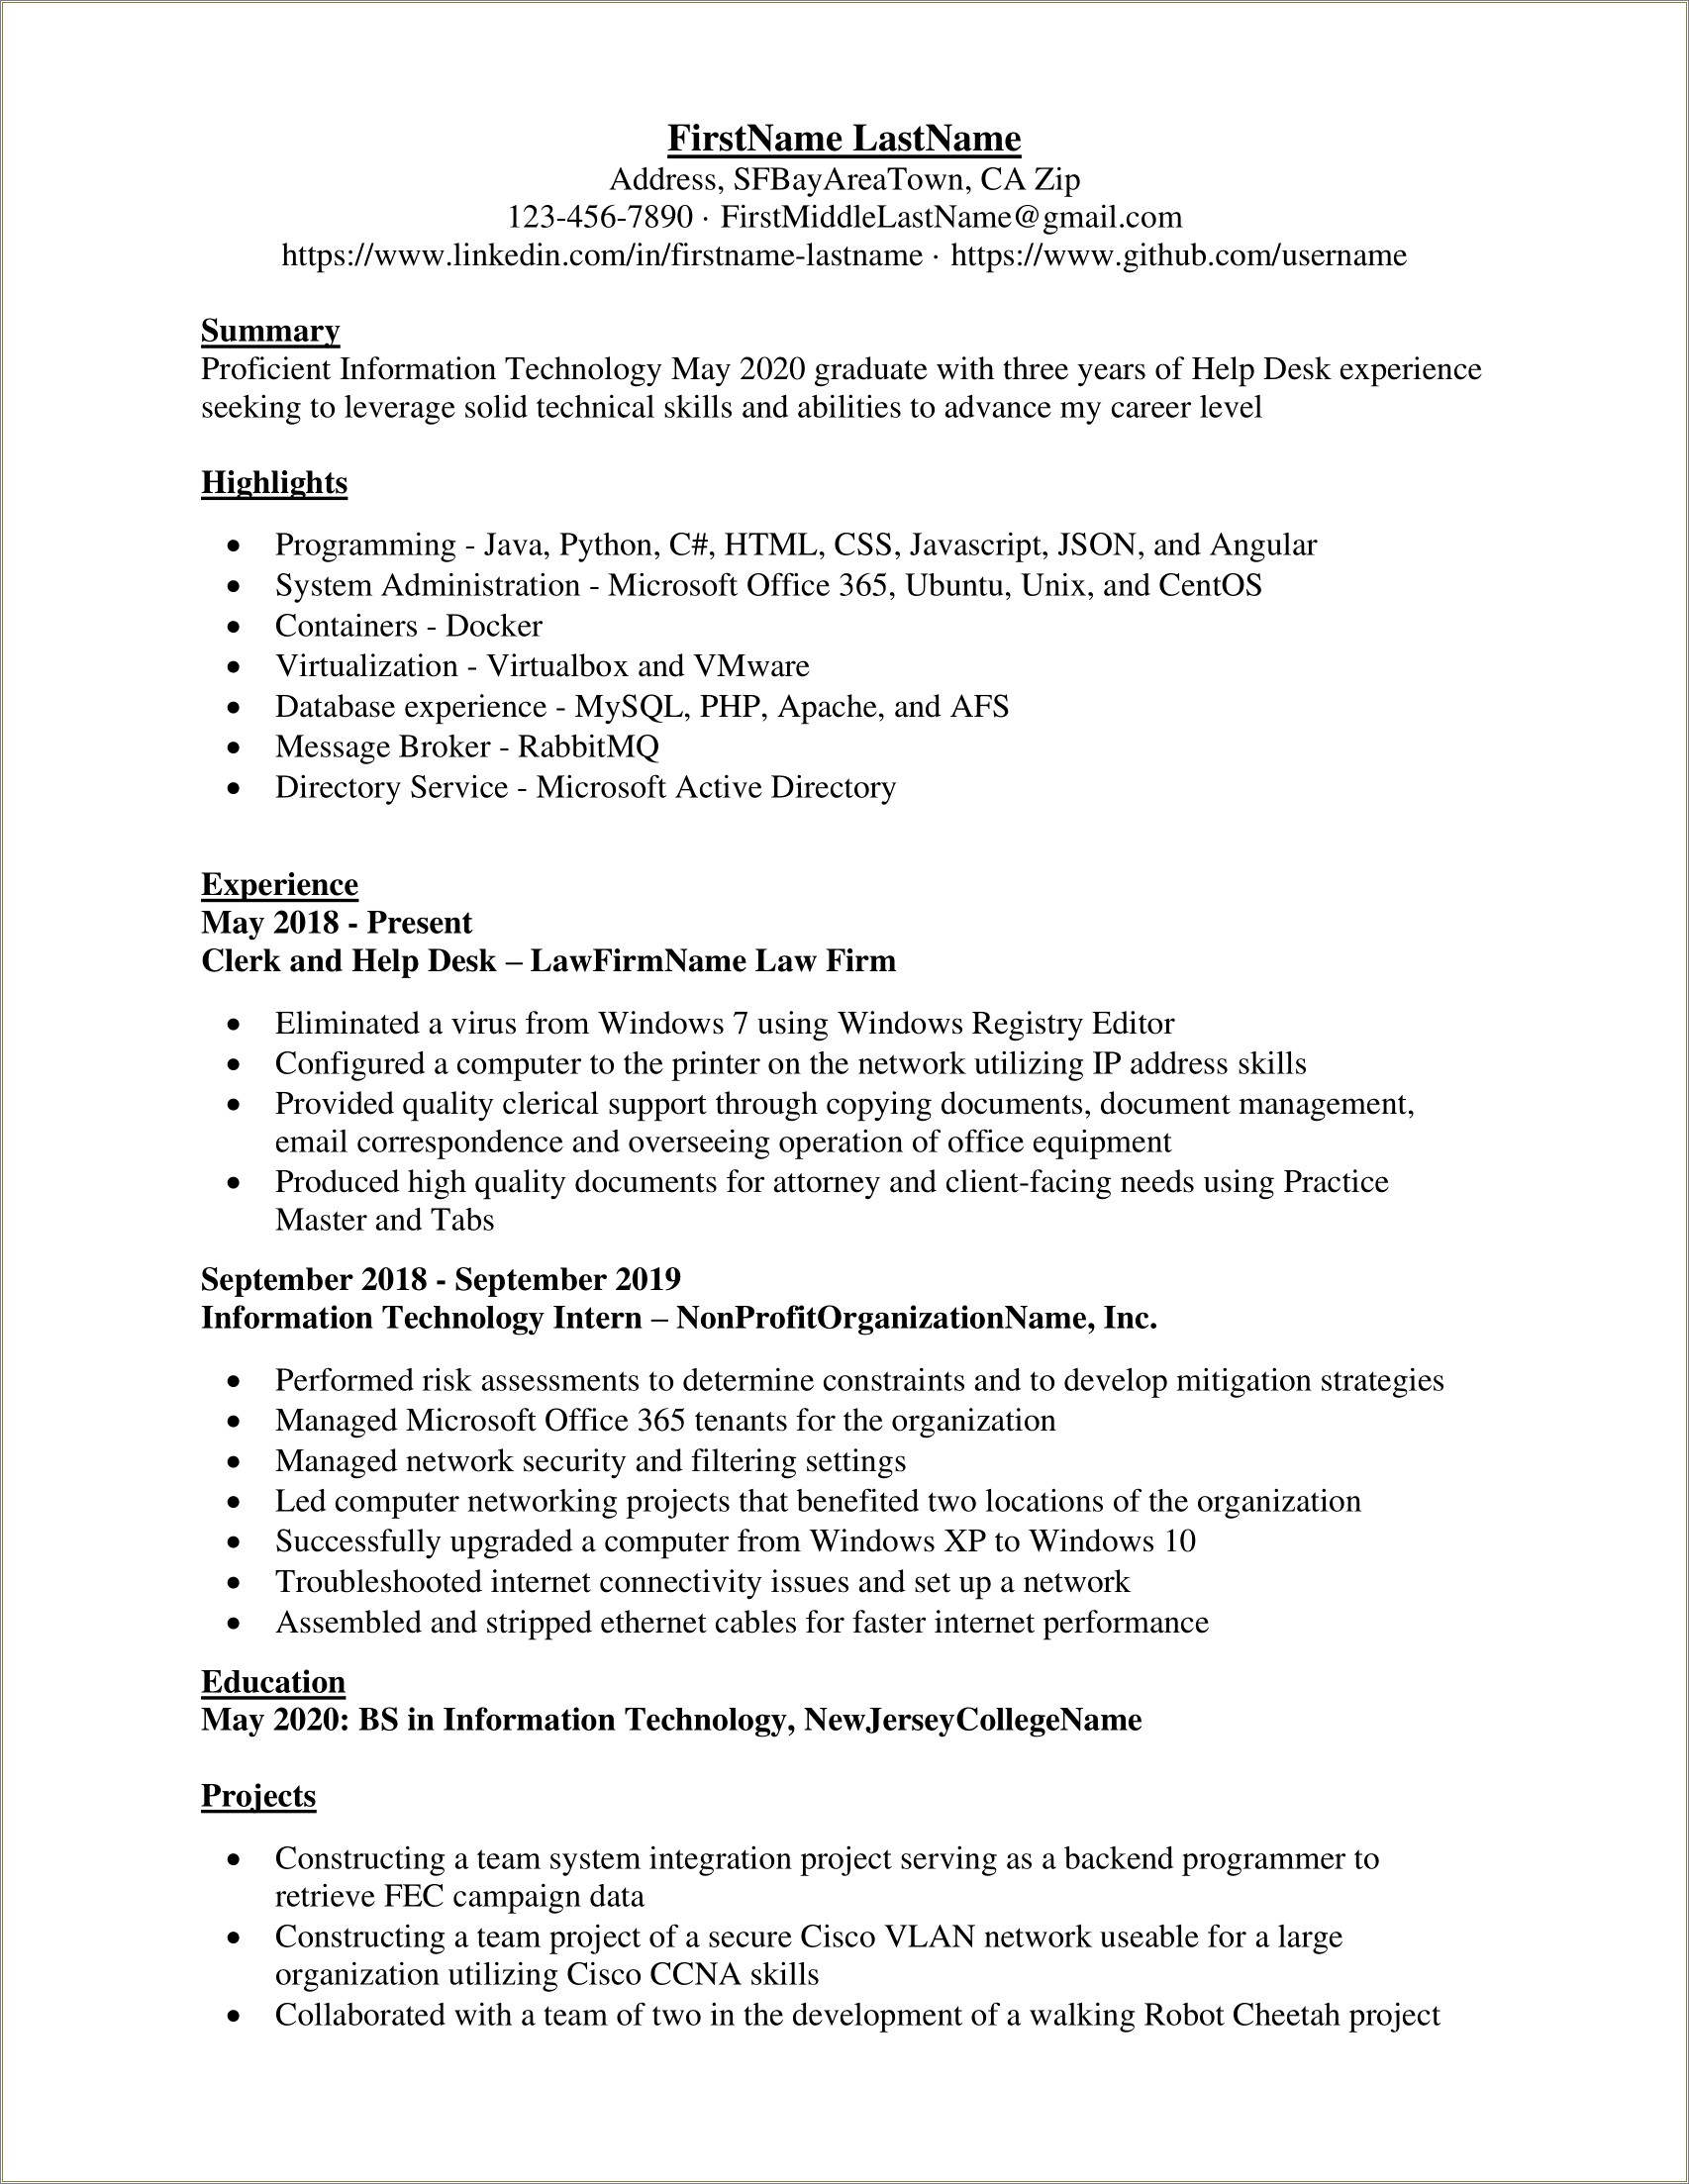 Listing Abilities And Skills On Resume